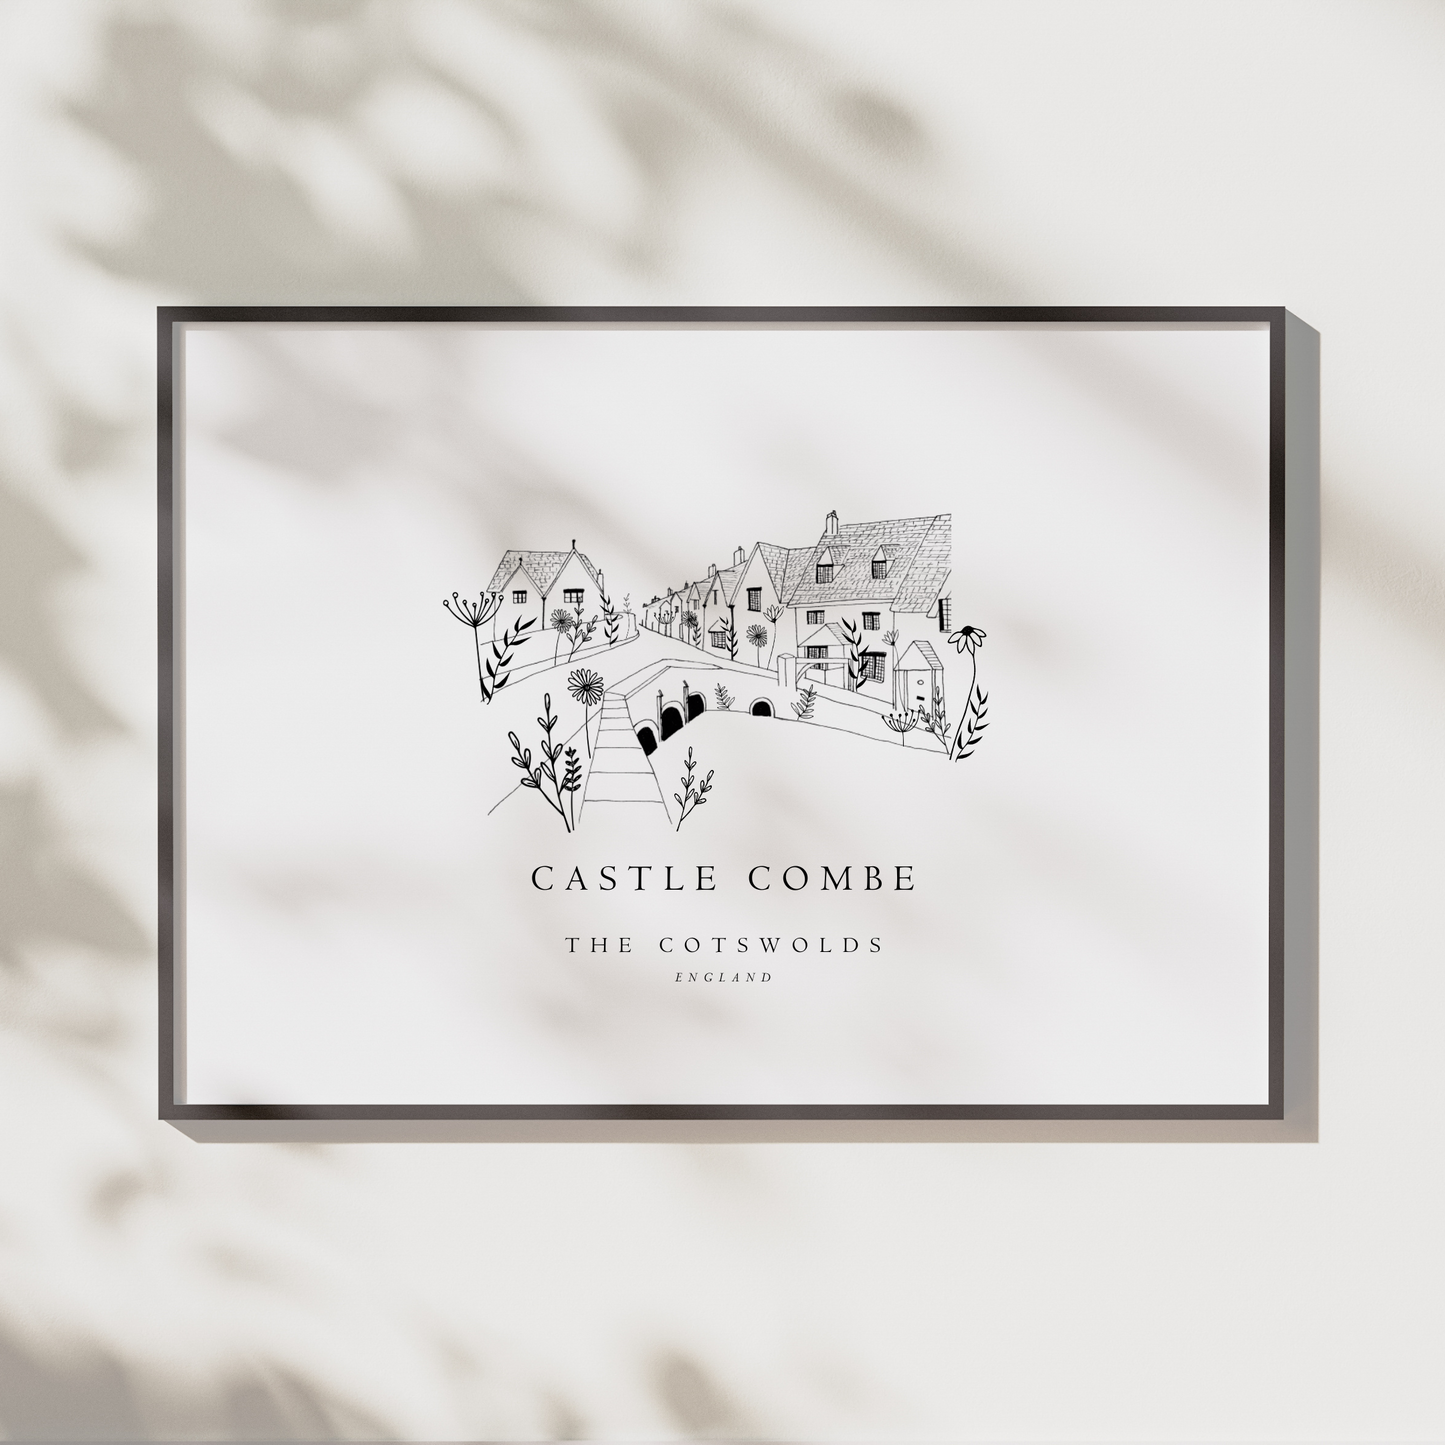 Castle Combe Cotswolds Print | Village Bridge | A4 or A5 Print - The Cotswold Illustrated Company